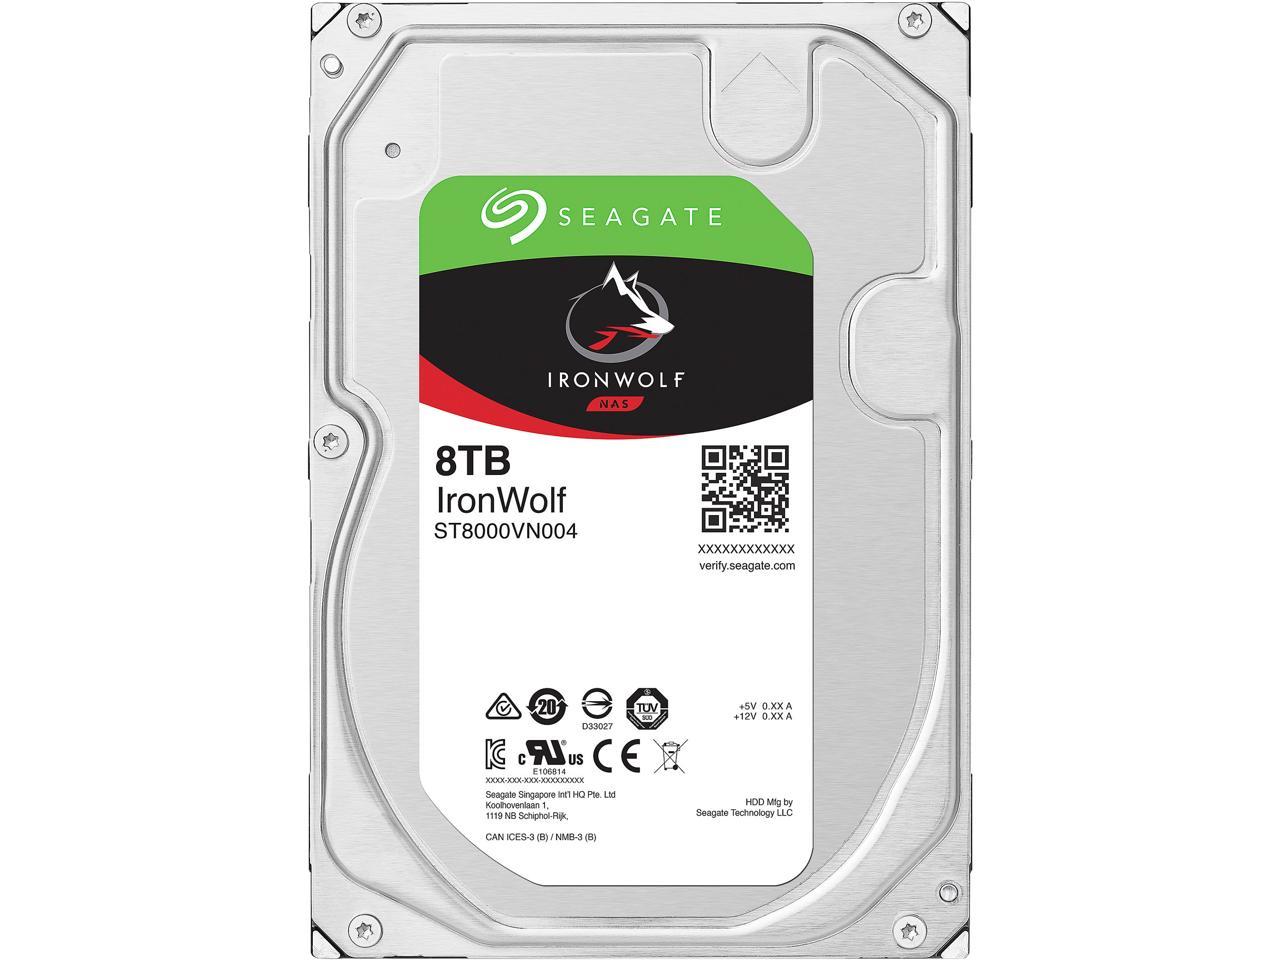 Seagate IronWolf 8TB ST8000VN004 7.2K RPM SATA 6Gb/s 256MB Cache 3.5" 2M2101-500 - Click Image to Close